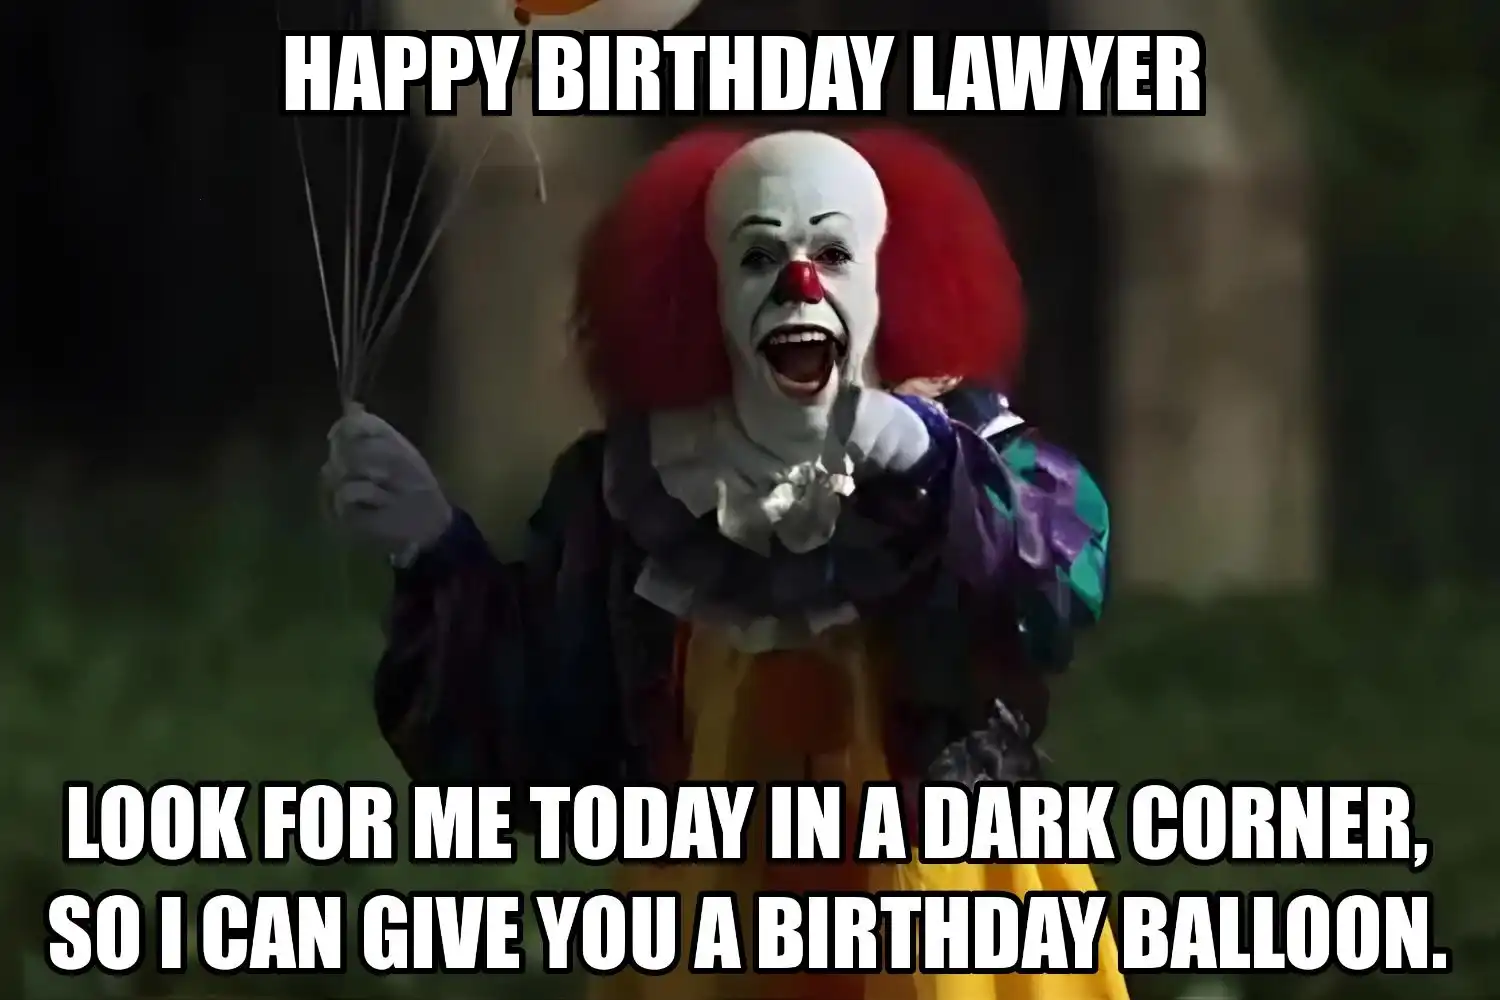 Happy Birthday Lawyer I Can Give You A Balloon Meme